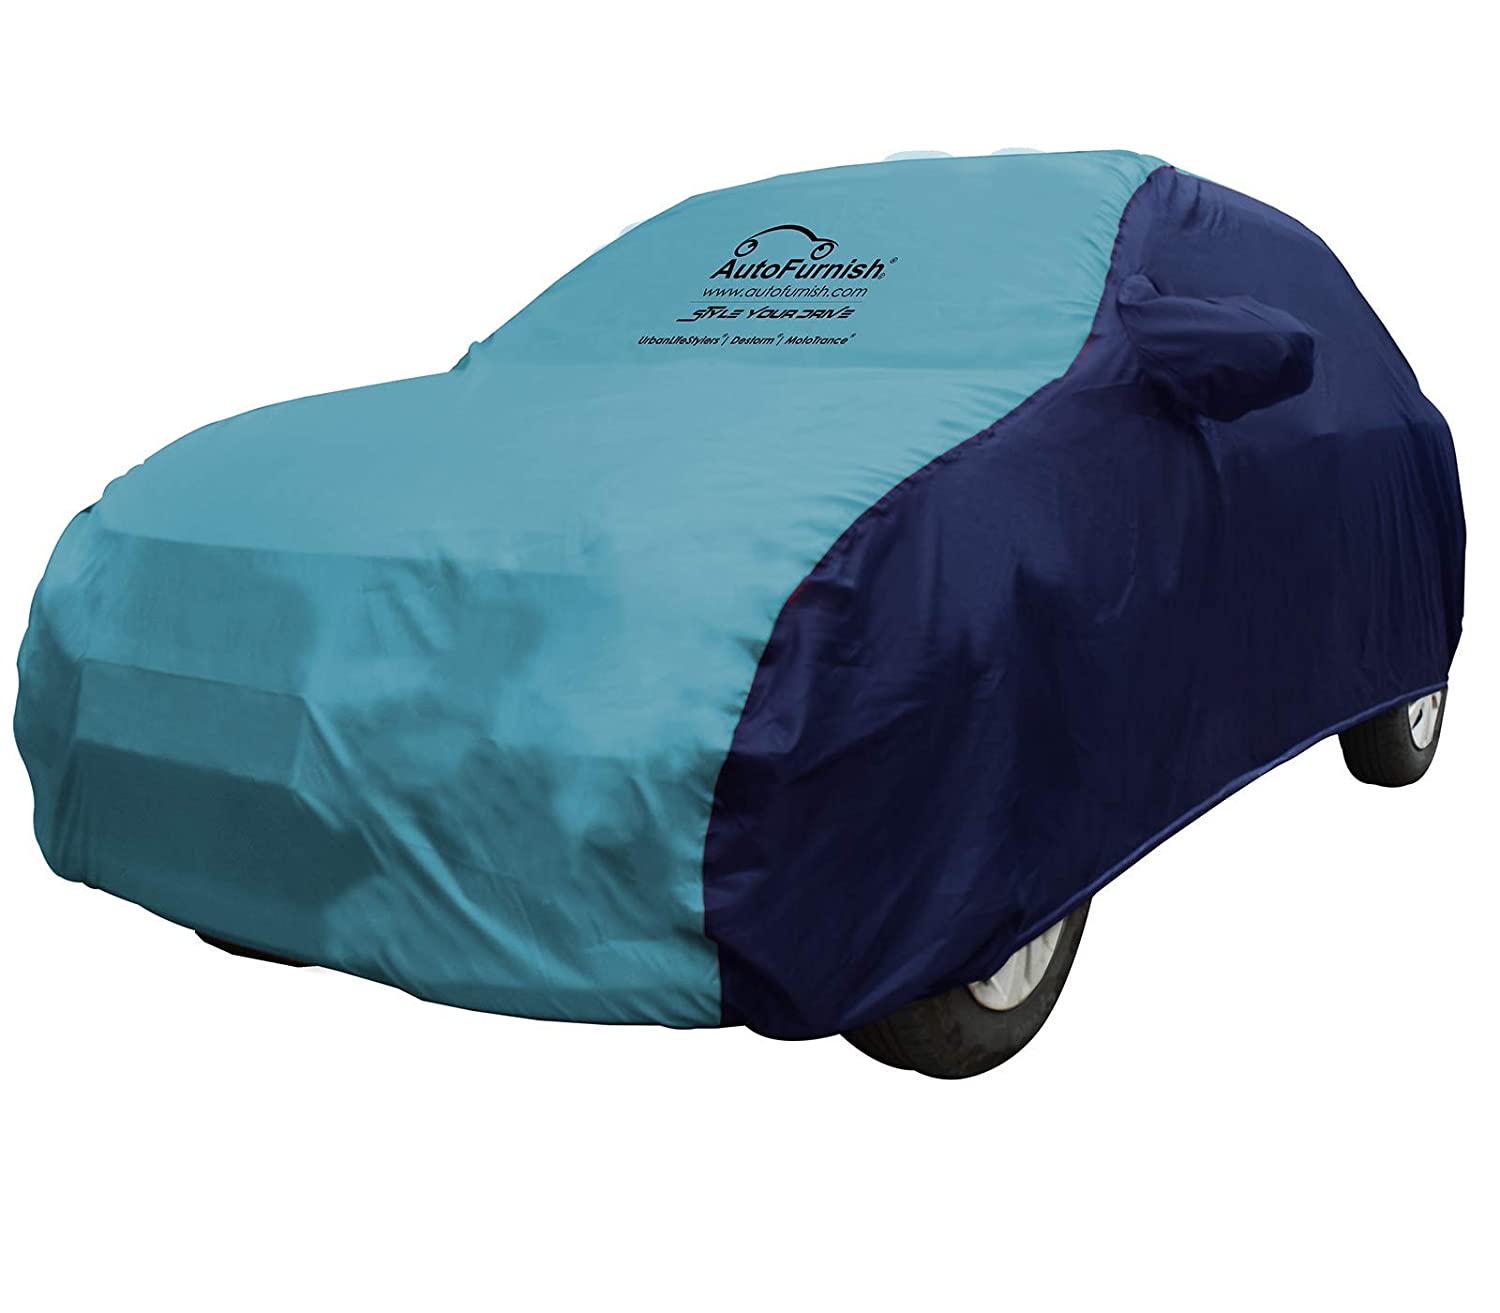 AutoFurnish Car Cover For Ford Figo (With Mirror Pockets) Price in